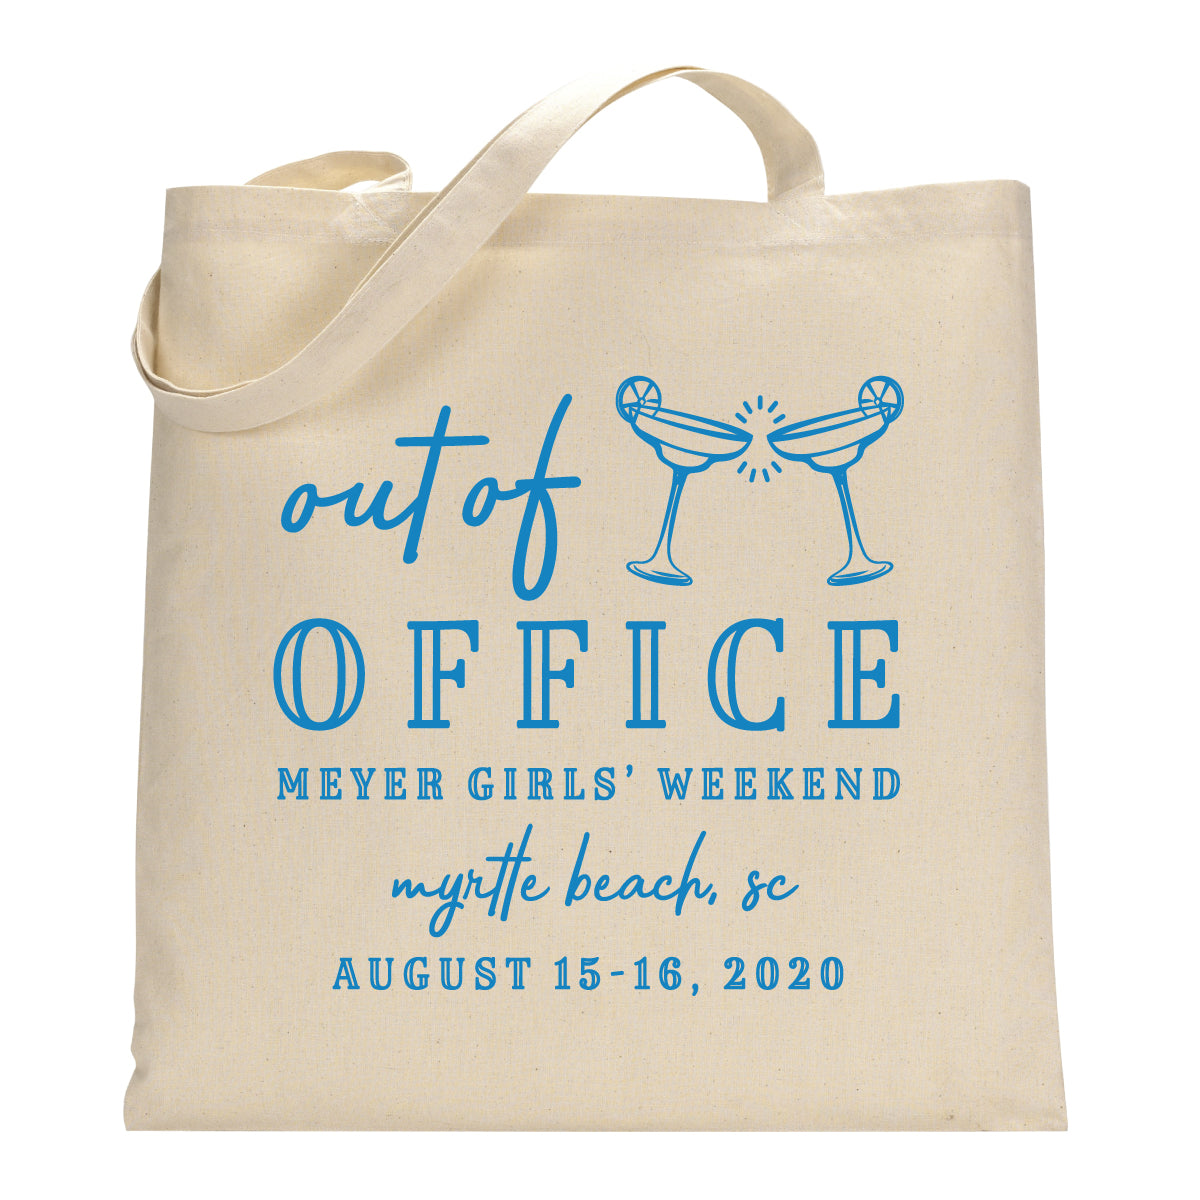 Out of Office Sip Hip Hooray Tote Bag